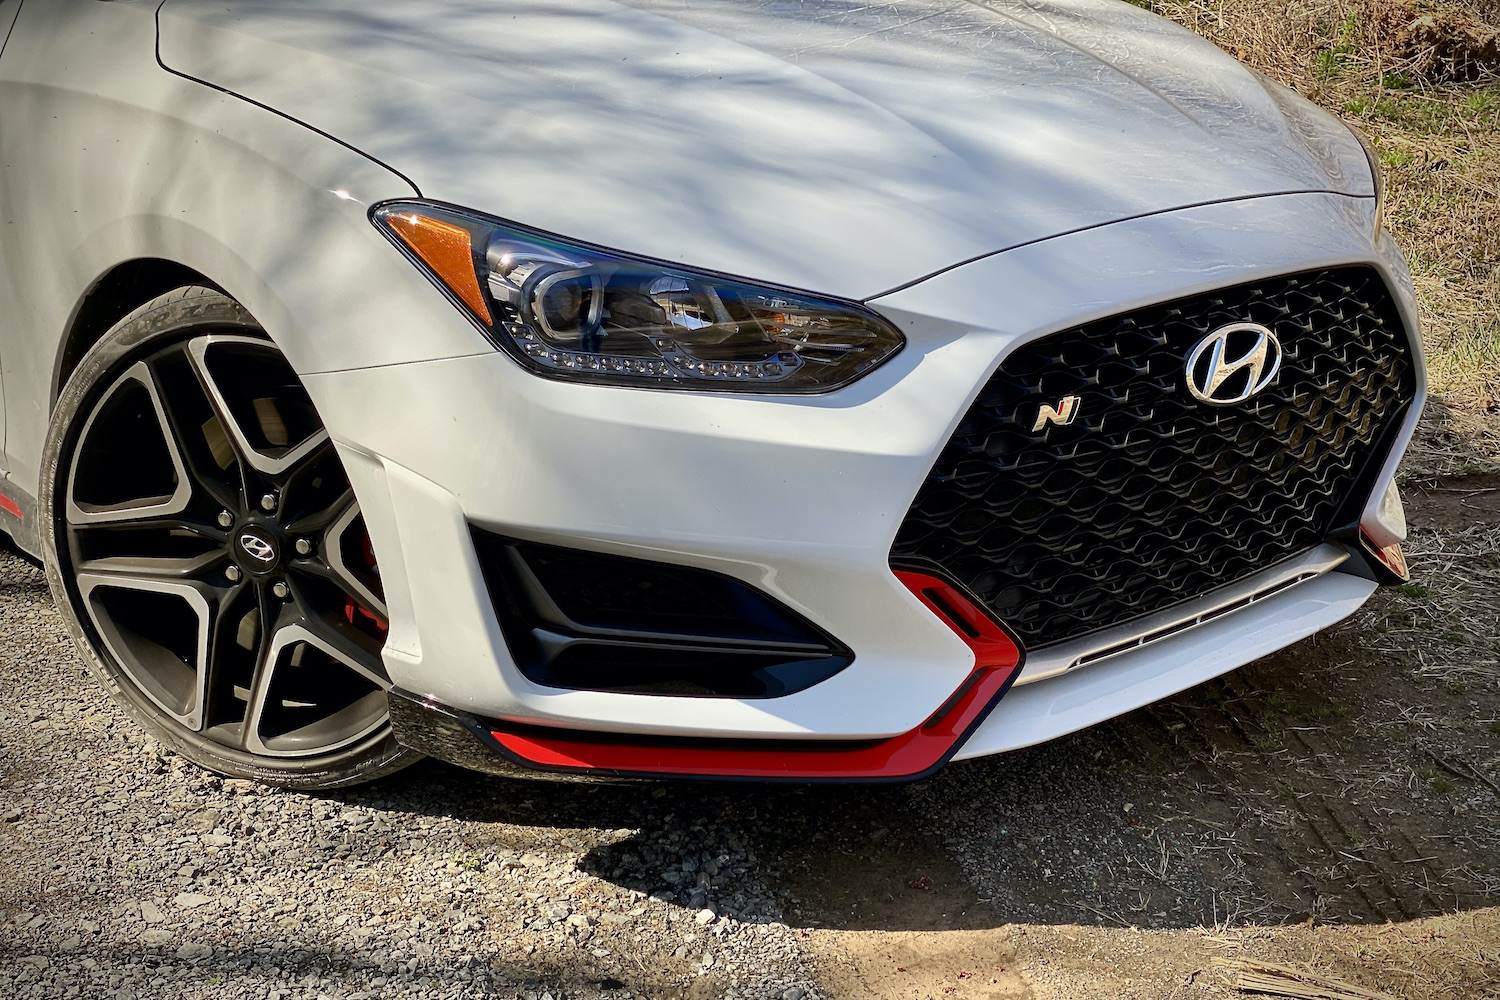 Hyundai Veloster N close up of left front headlight and air vent.